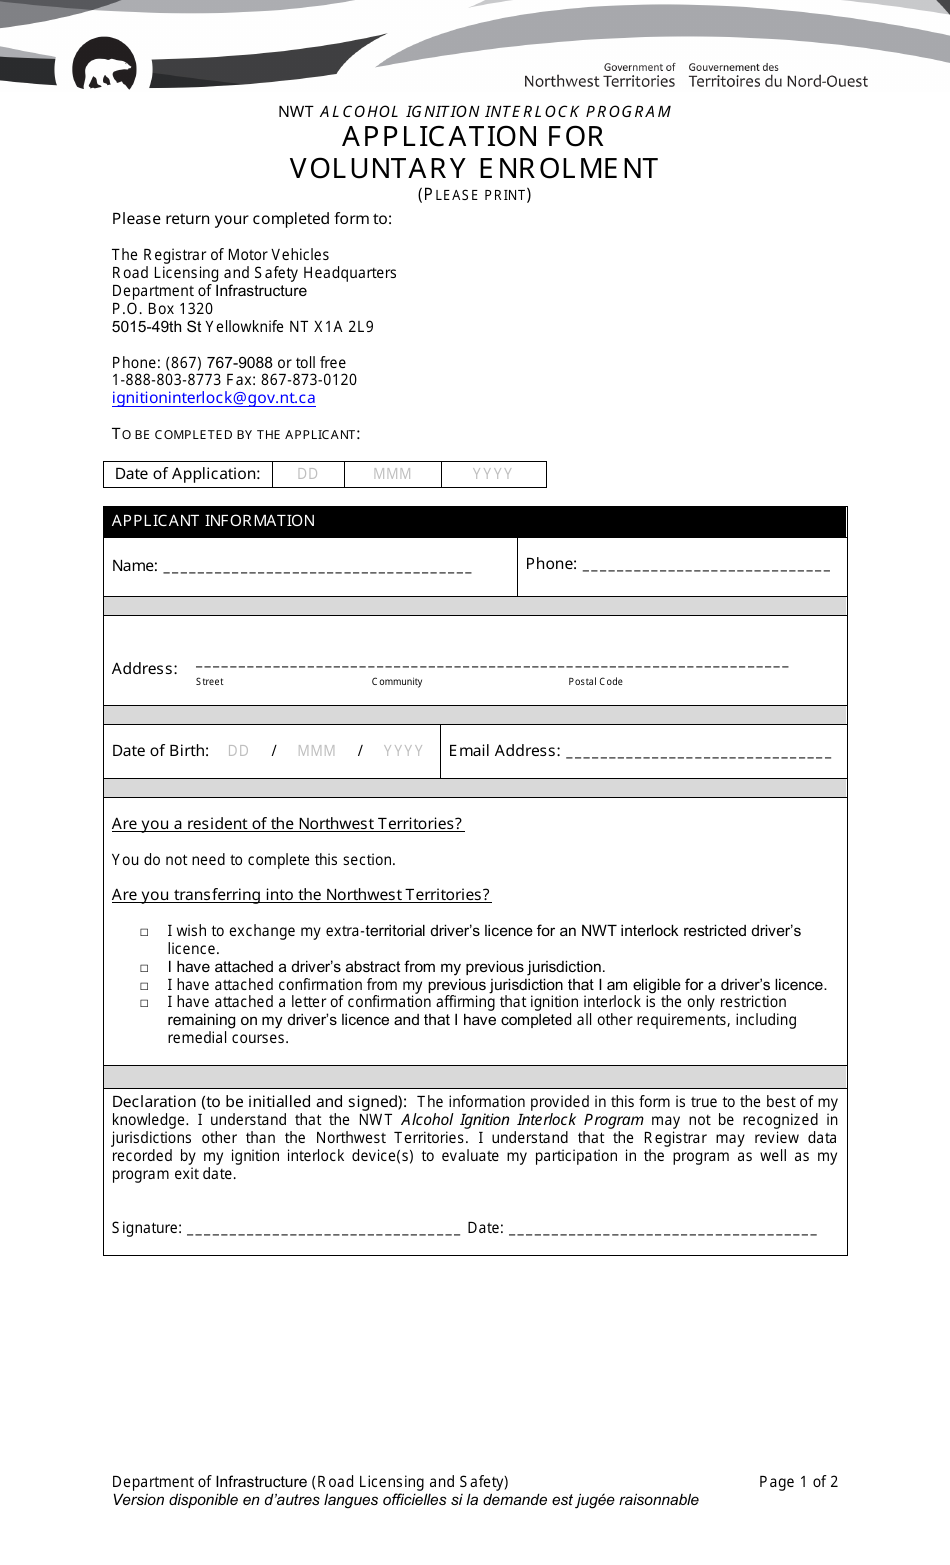 Application for Voluntary Enrollment - Northwest Territories, Canada, Page 1